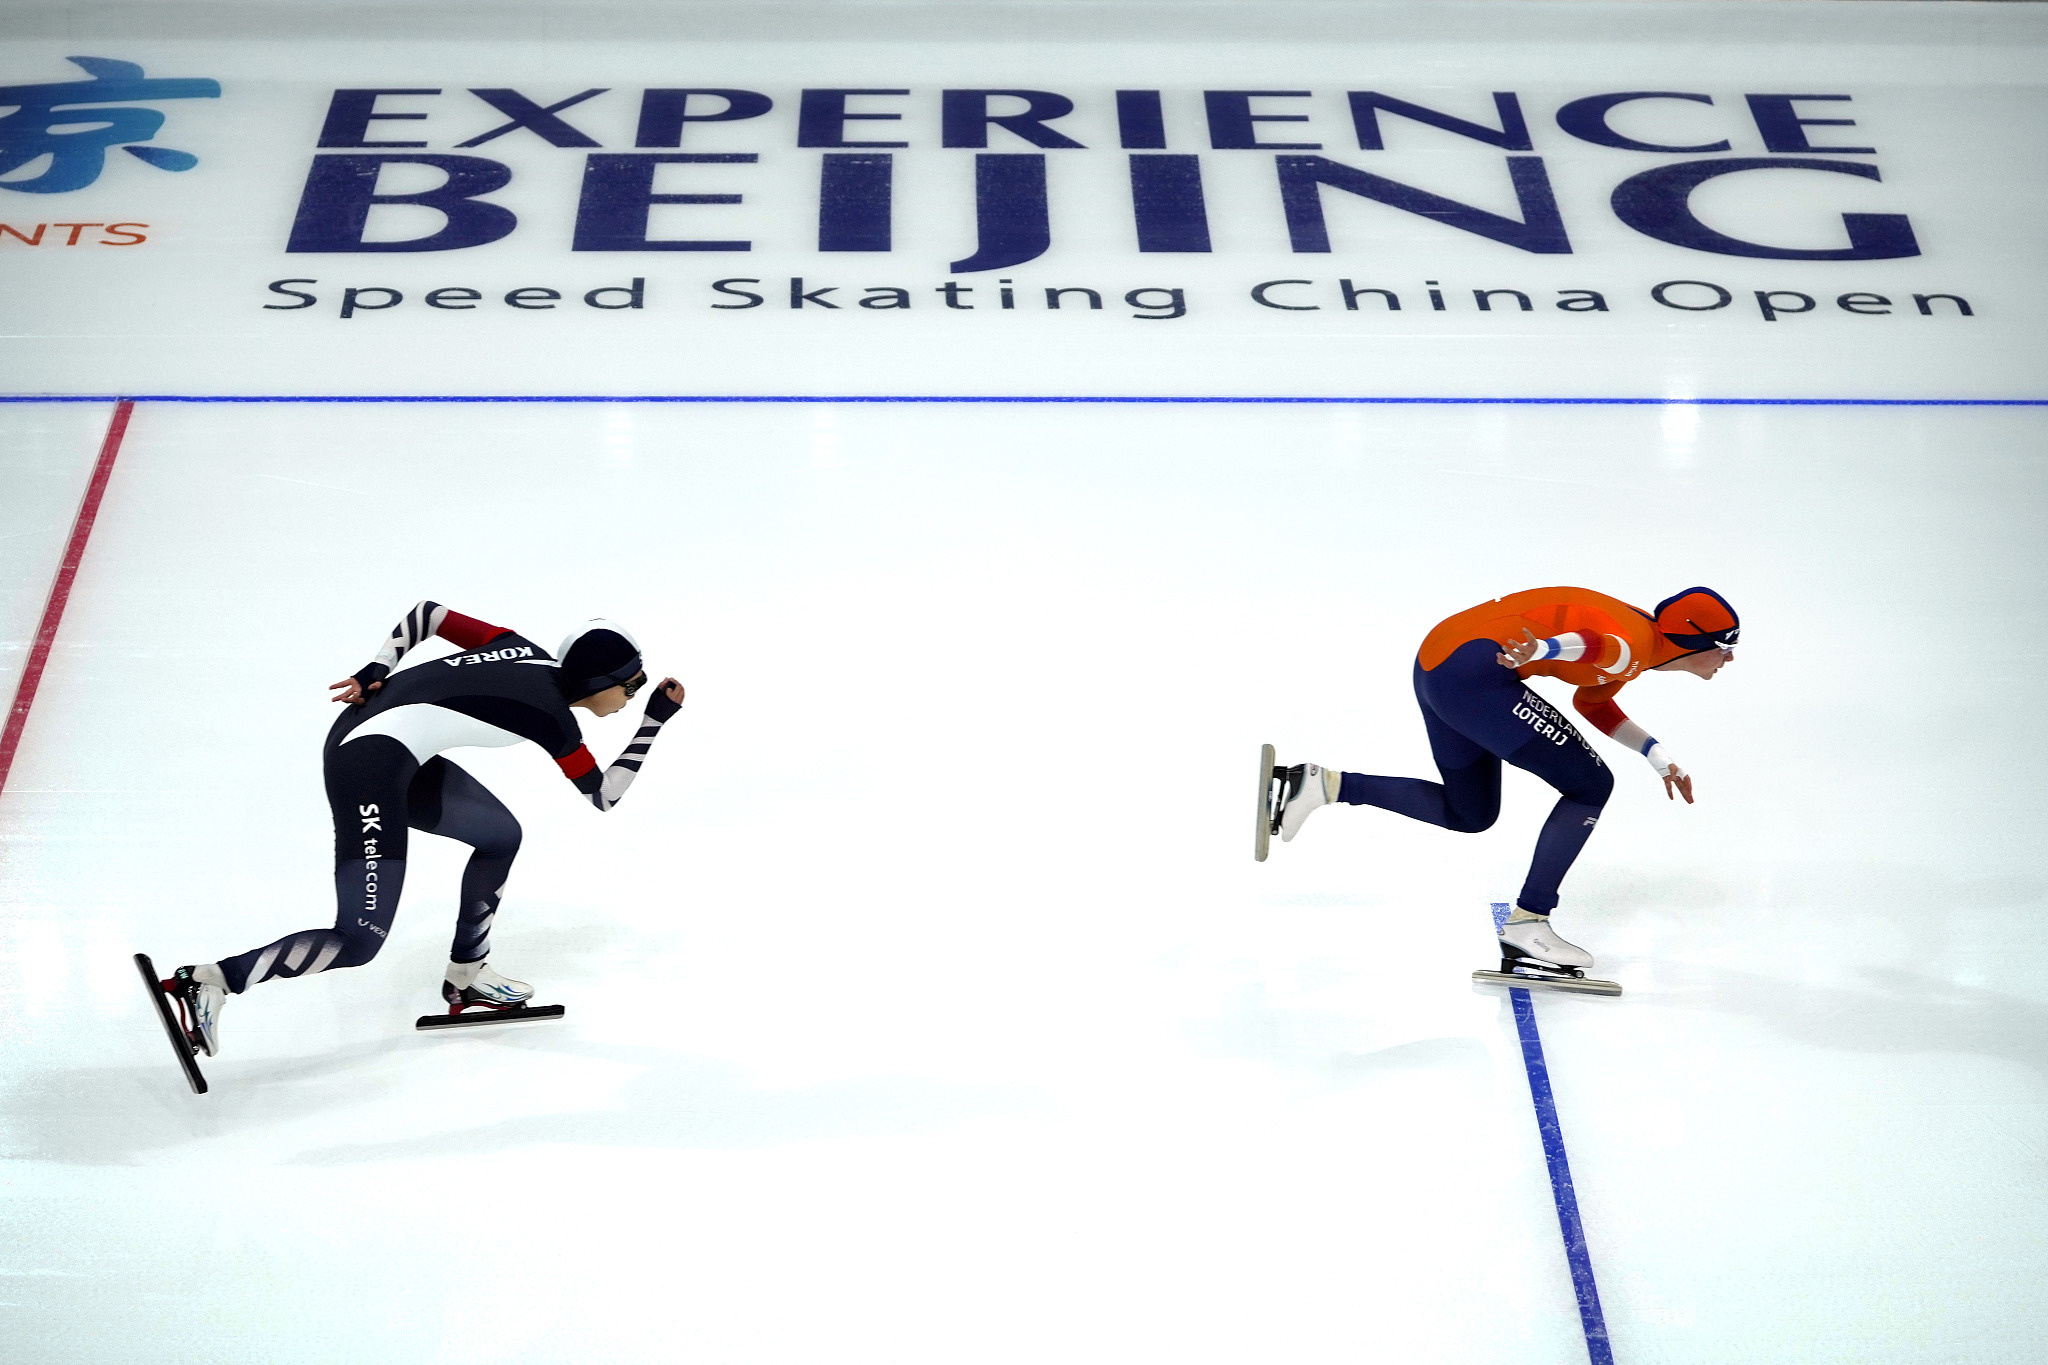 Speed Skating: Beijing 2022, Speed Skating China Open, Winter Olympic Games test event, National Speed Skating Oval. 2050x1370 HD Wallpaper.